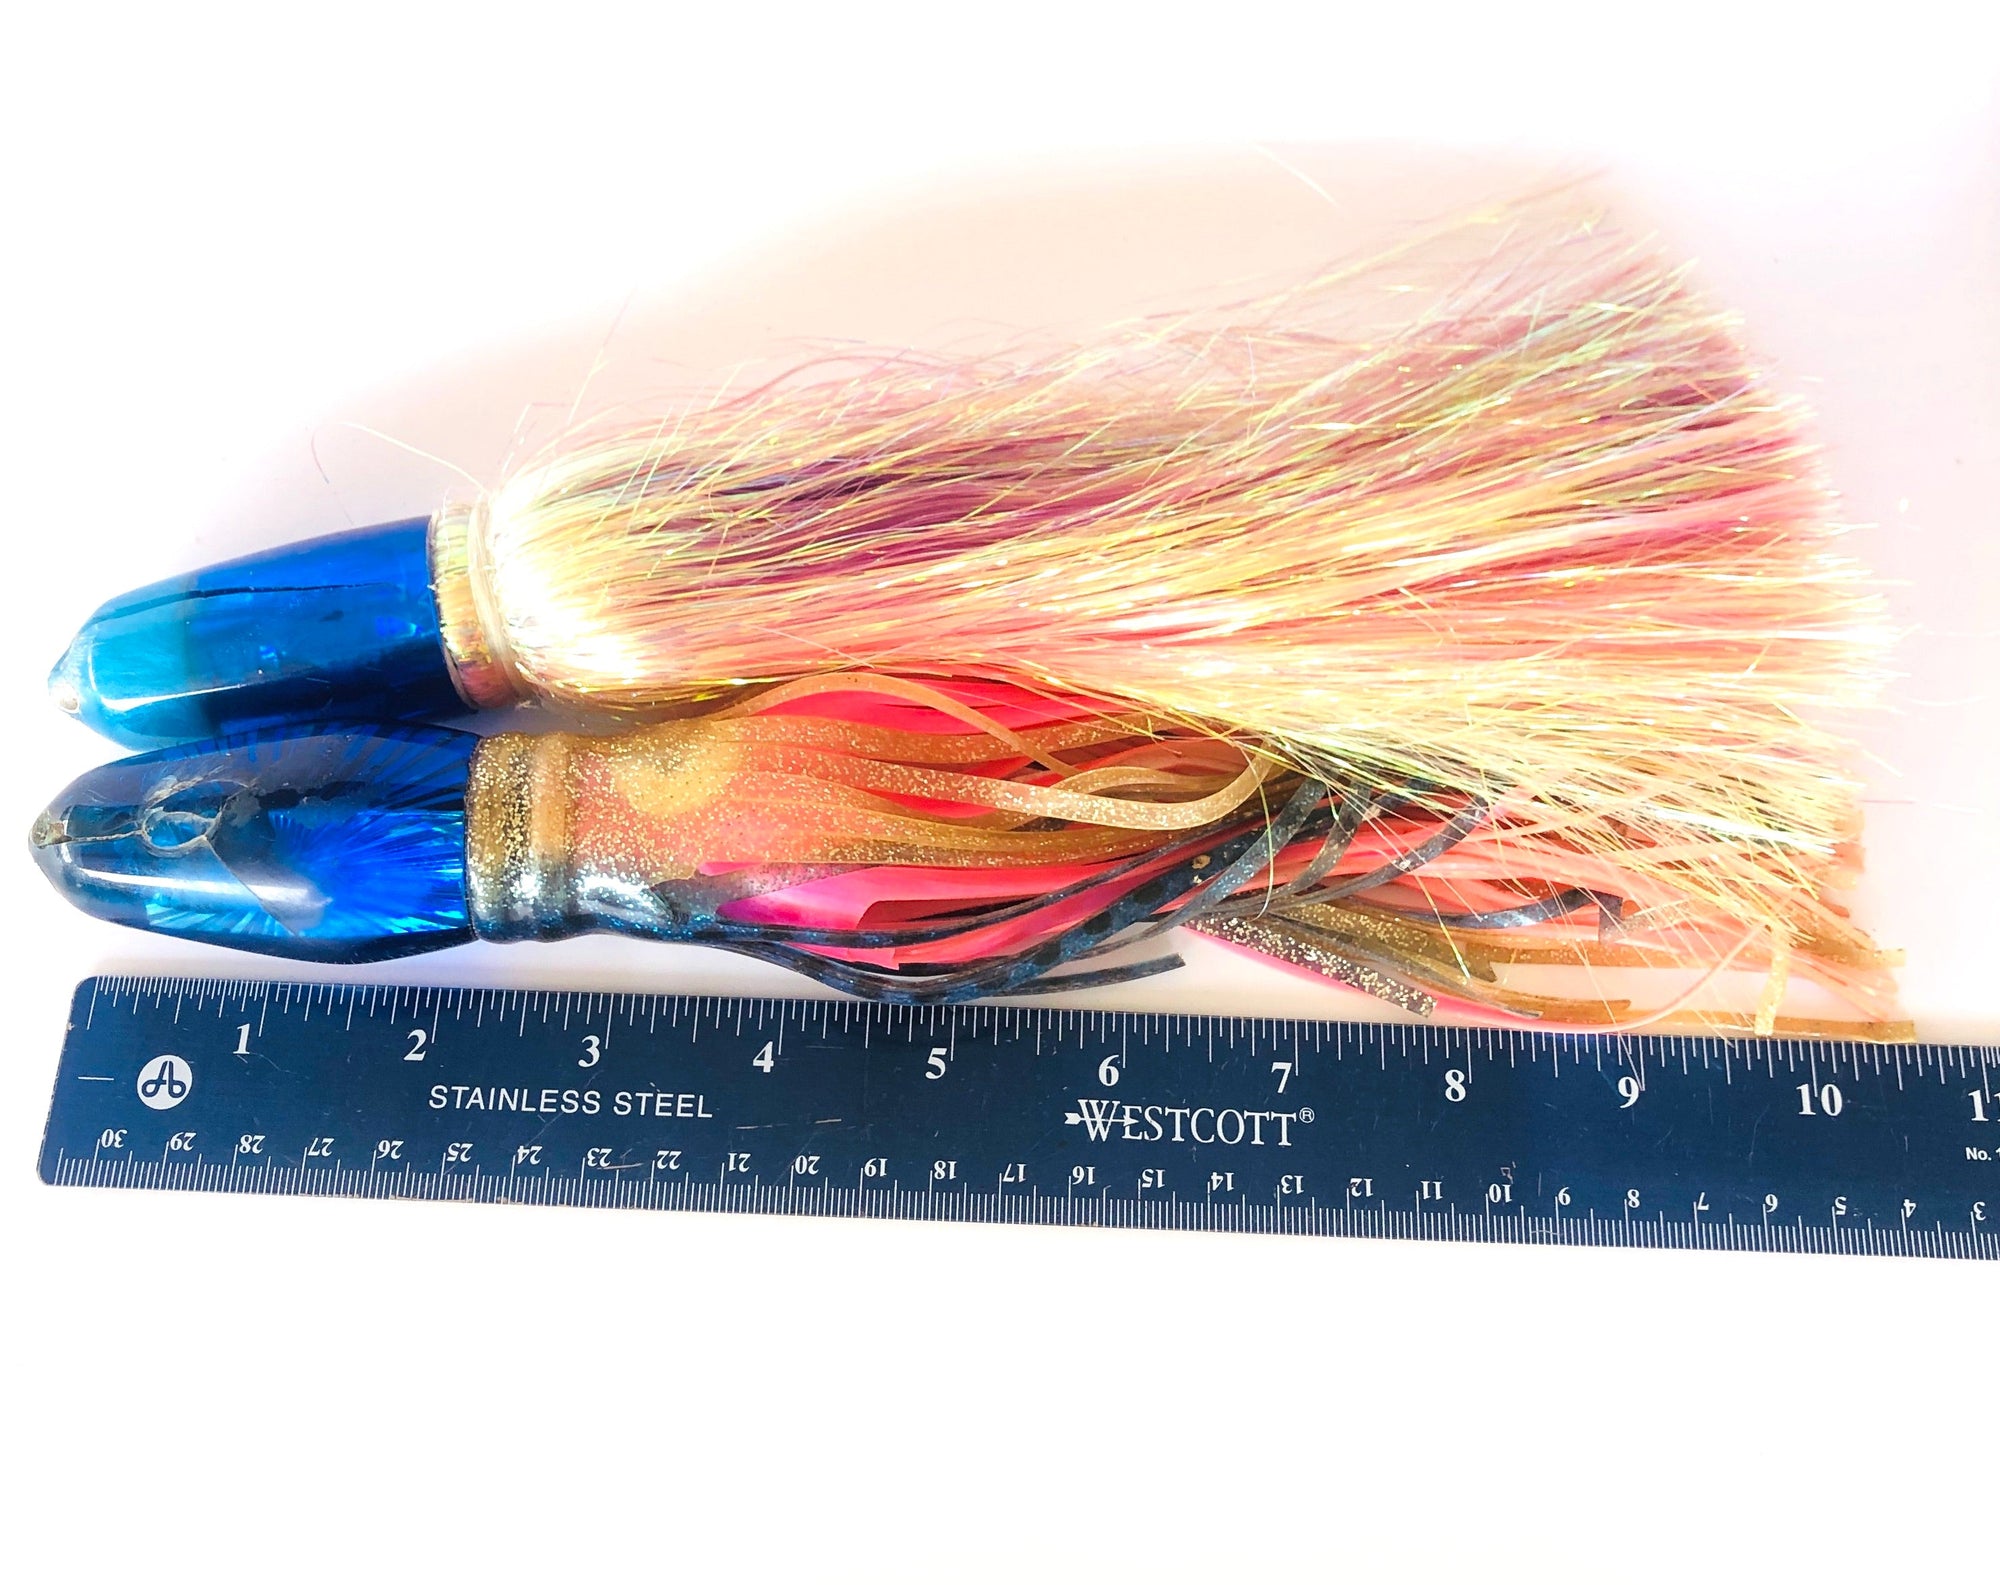 Saltwater Tackle New & Used Trolling Lures